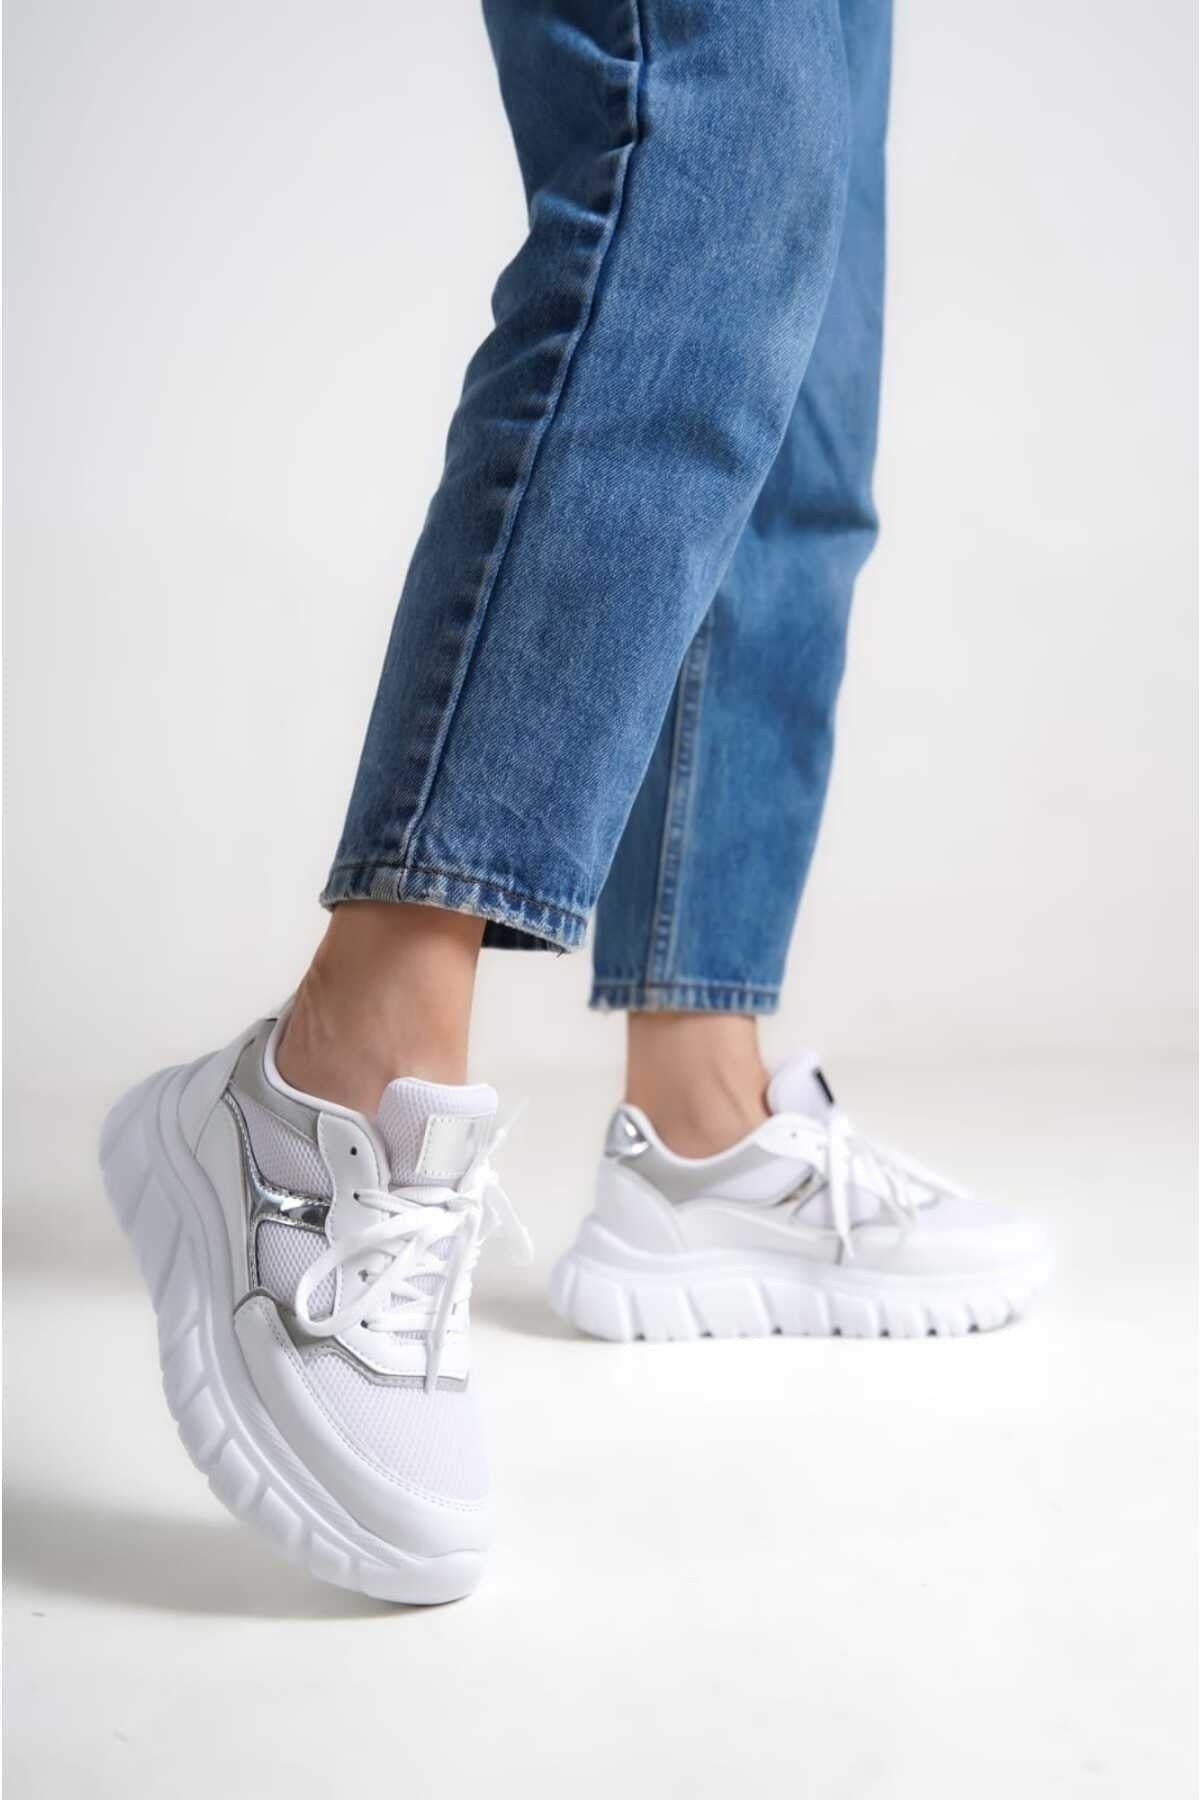 Women's Lace-Up Mesh Casual Sneaker Sneakers RM0474